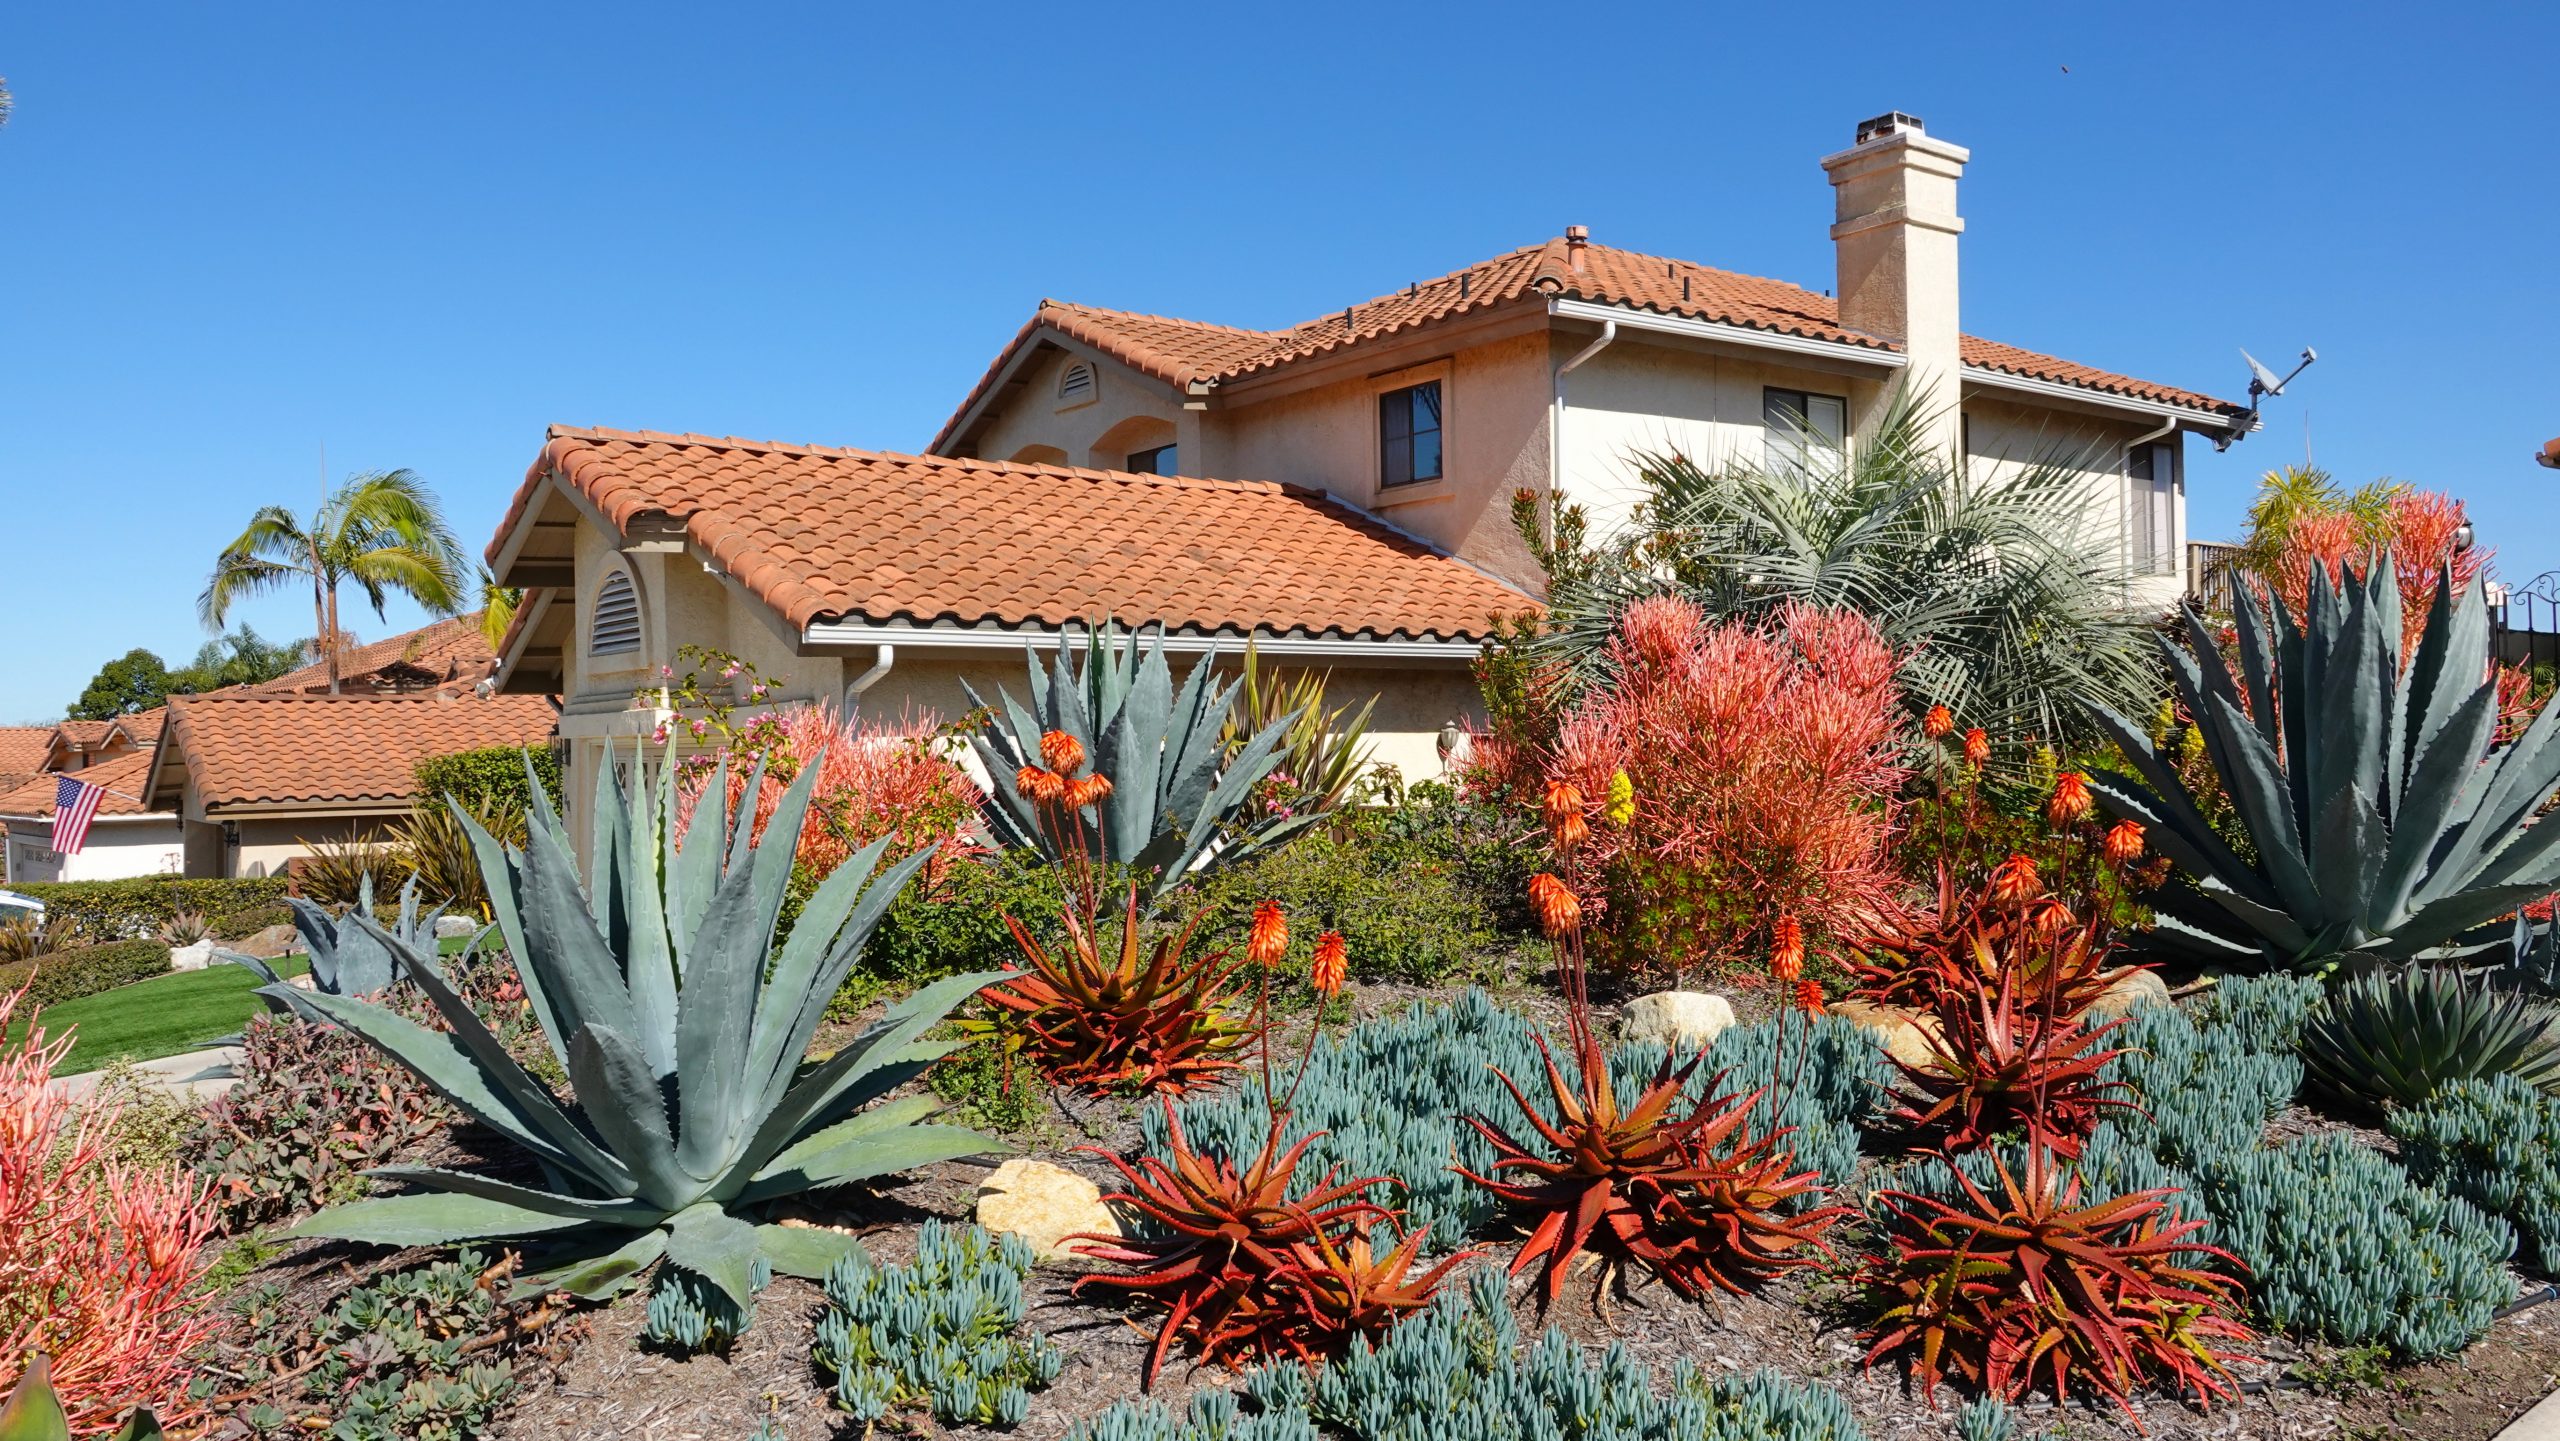 Native landscaping in a dry climate with drought resistant plants